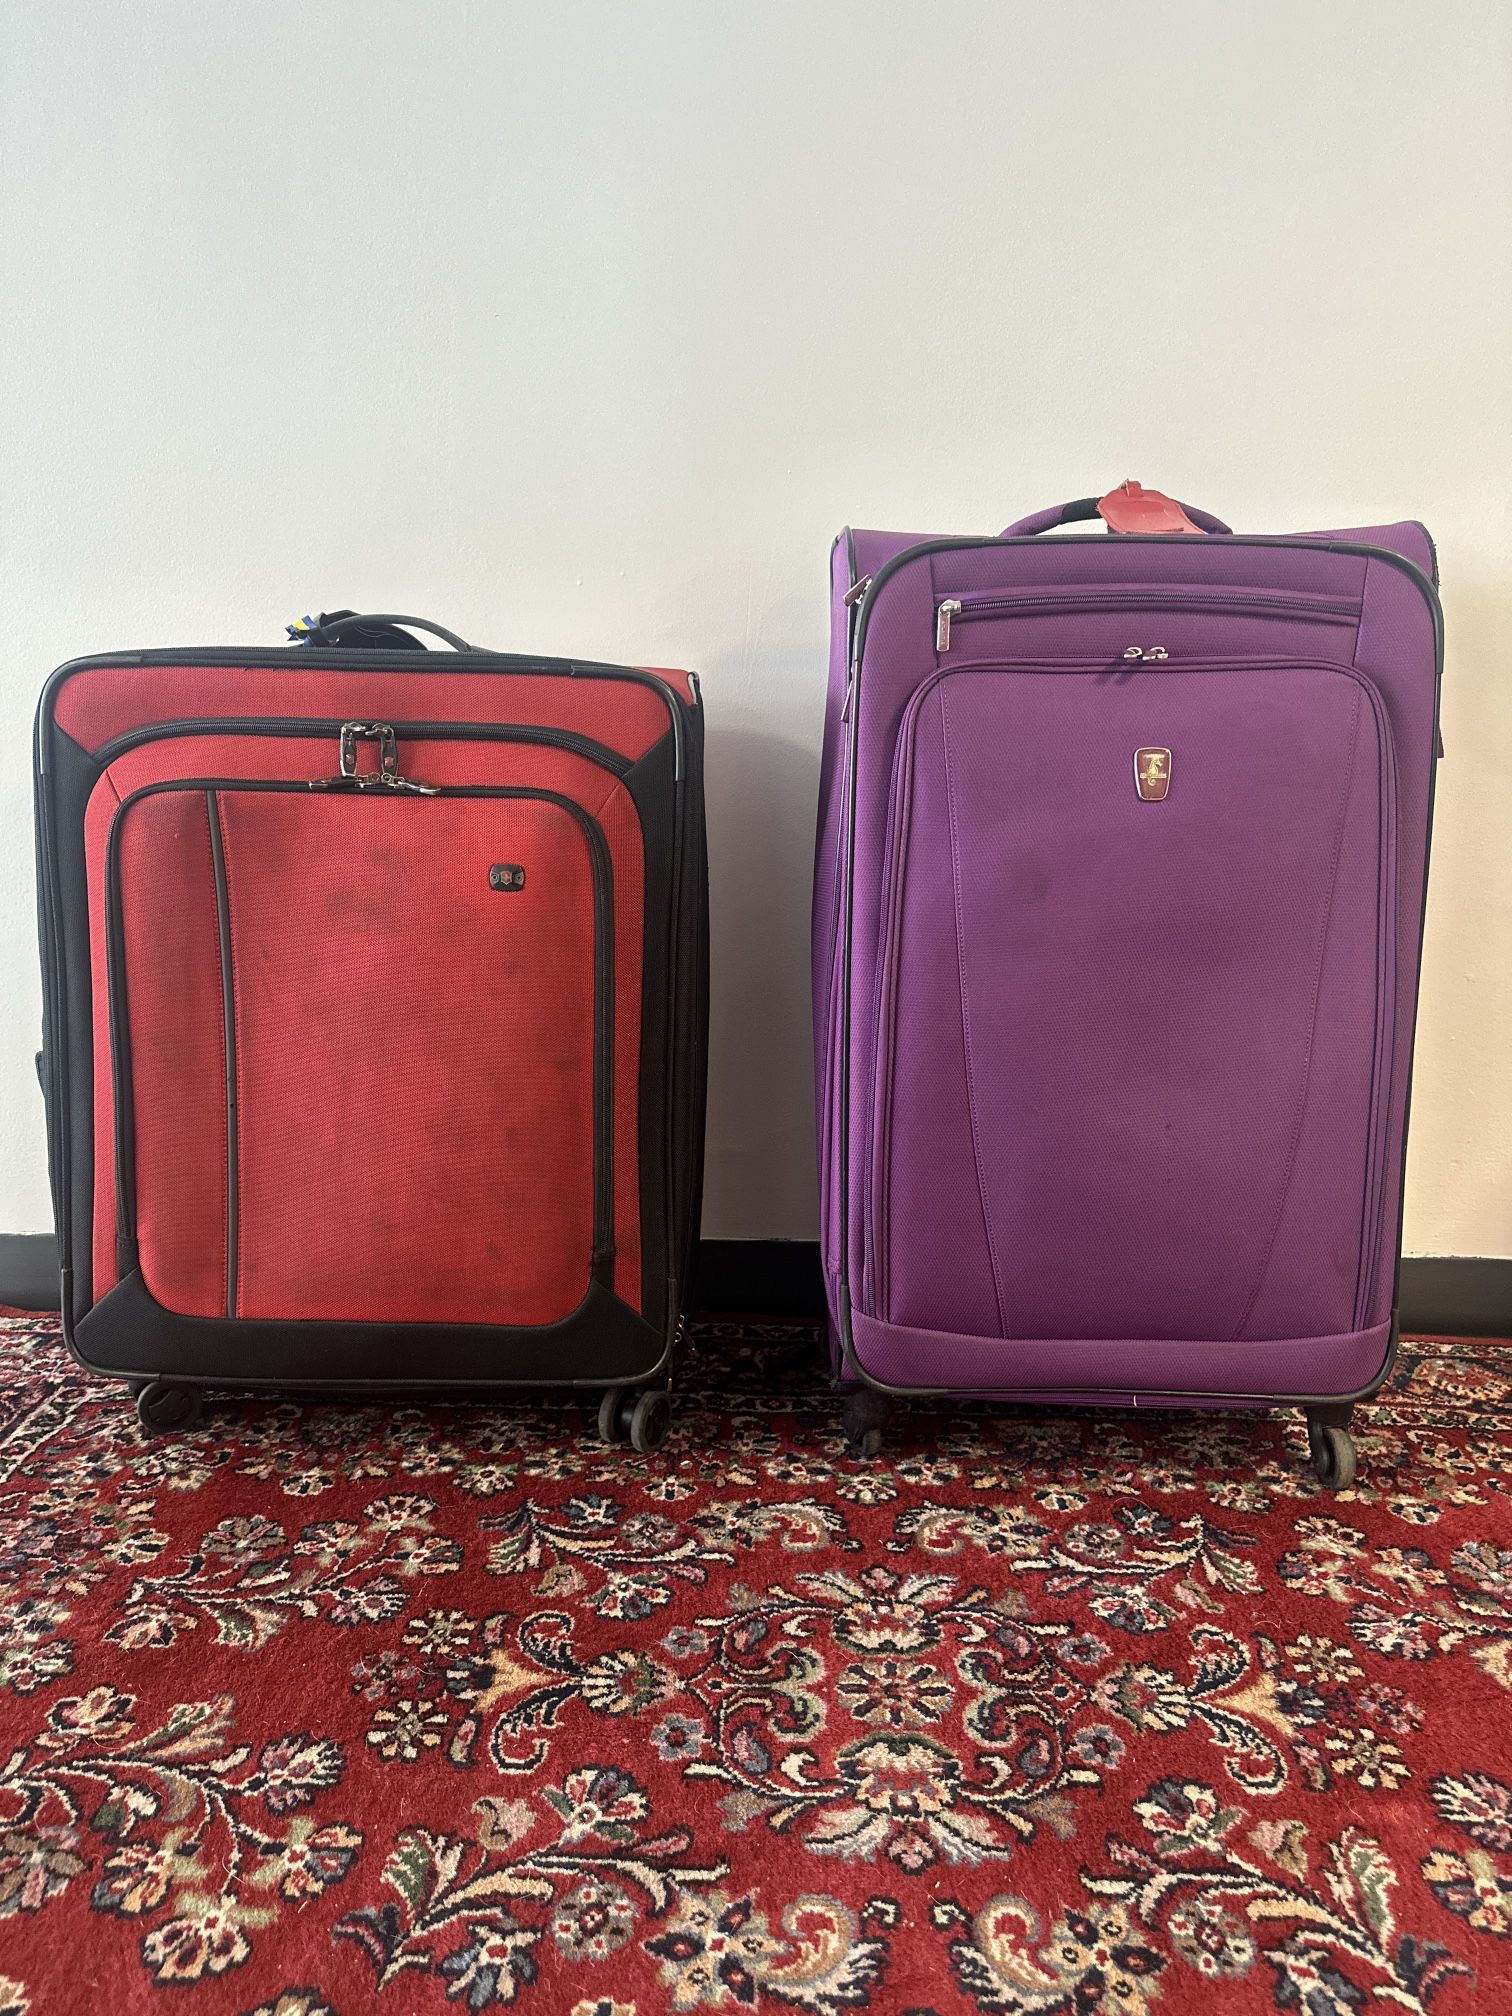 $15 each luggage & Small bags $5